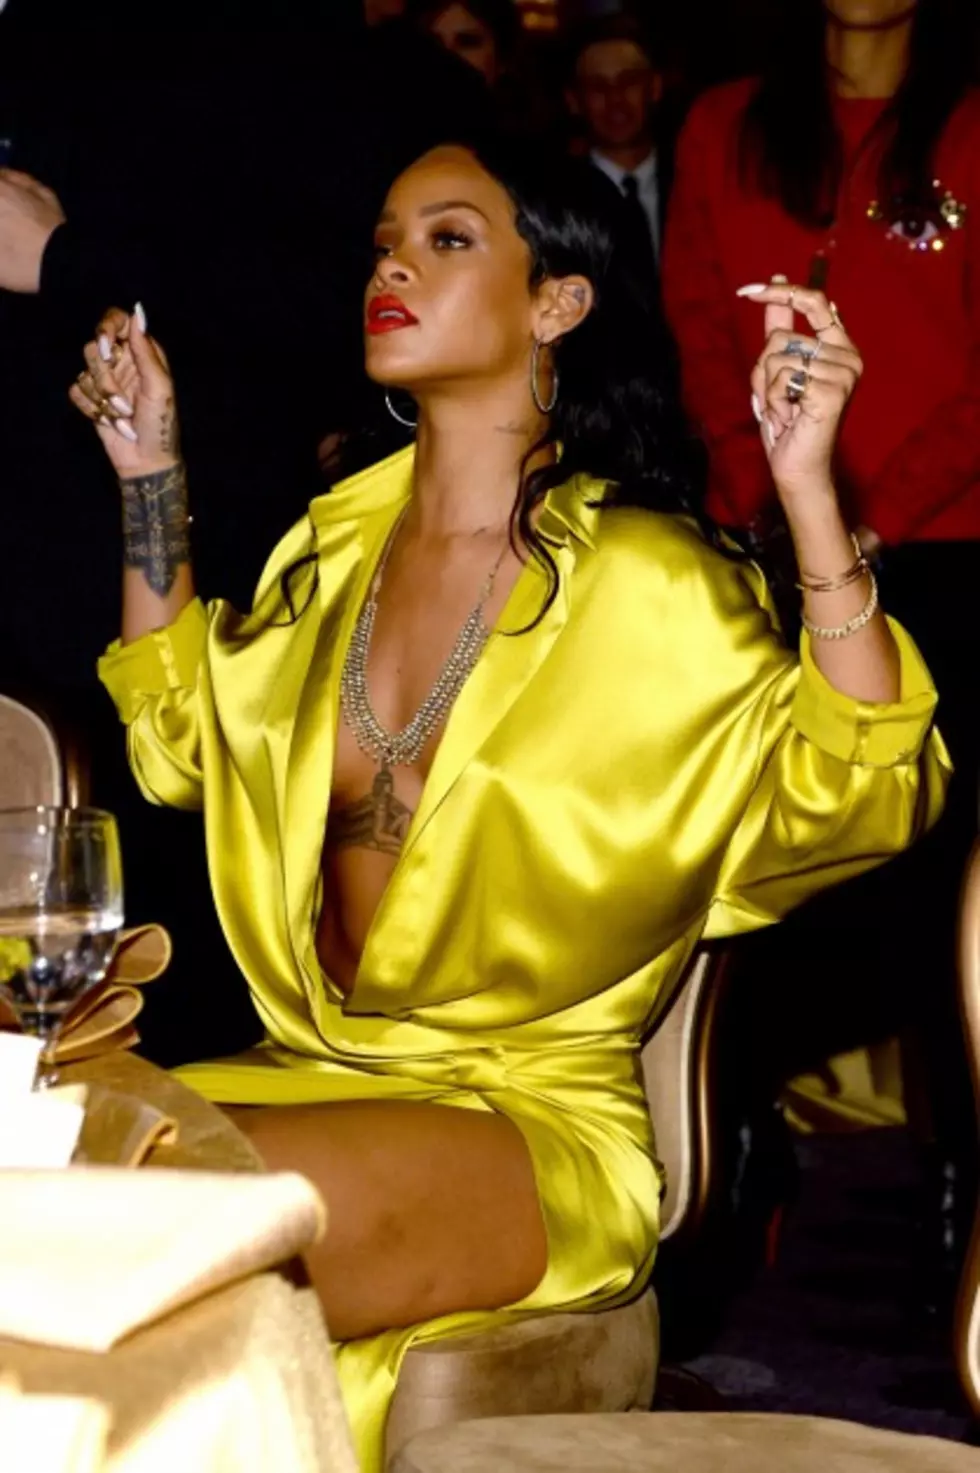 Rihanna Left Very Little To The Imagination With Her Outfit At An After-Party In Paris [NSFW PICS]